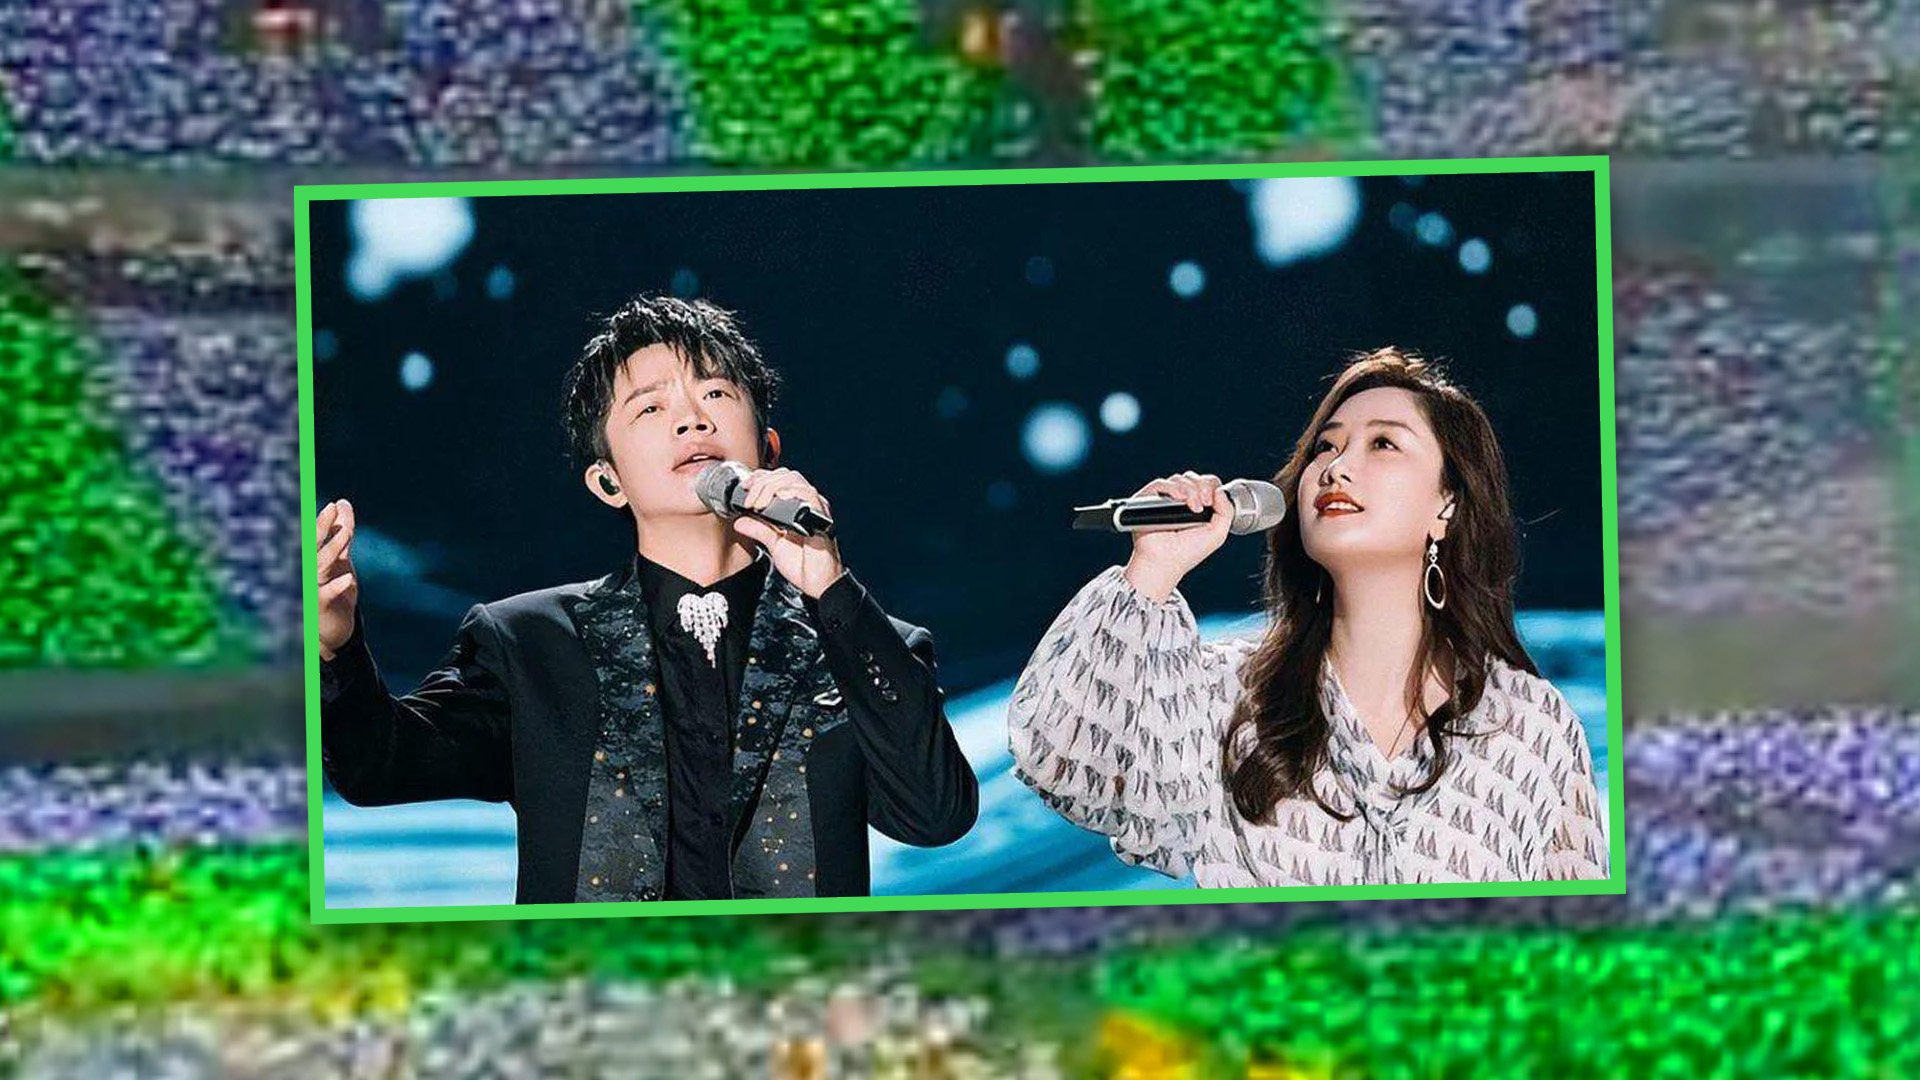 Who are Phoenix Legend? The mainland music duo some say are the most influential pop group in China. Photo: SCMP composite/Baidu/YouTube